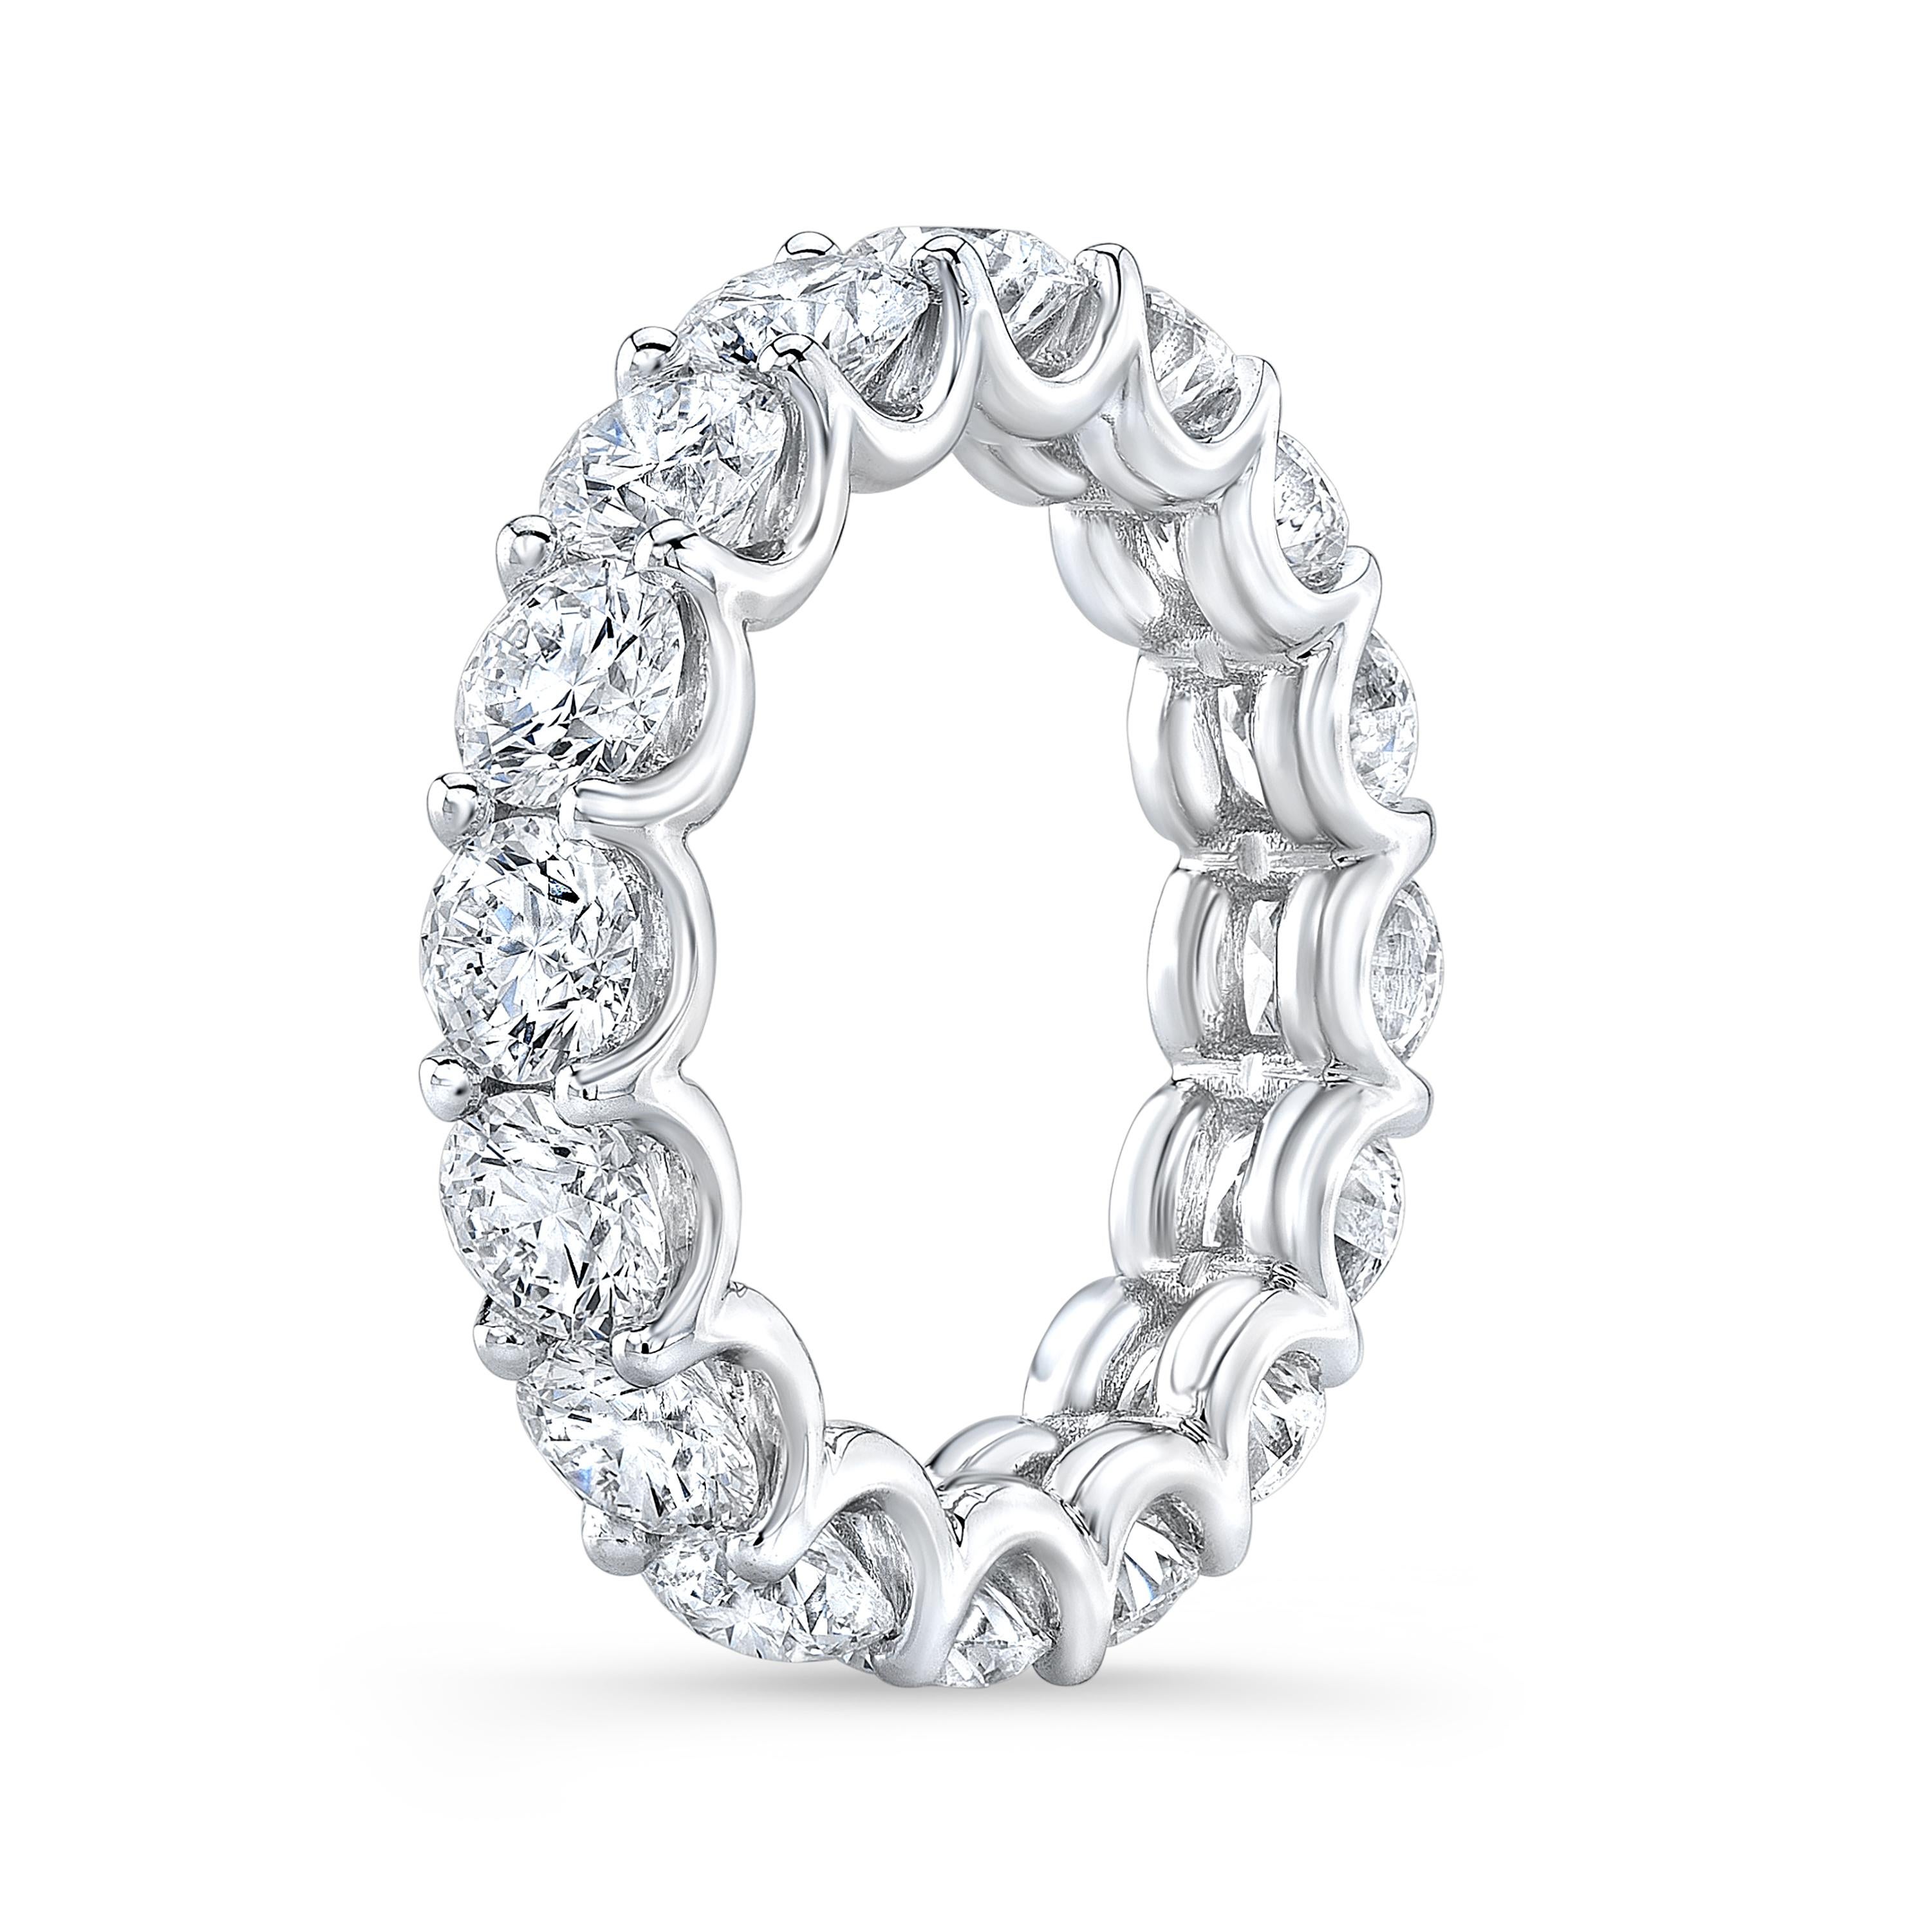 For Sale:  6 Carat Diamond Eternity Band Classic Round Cut G Color SI1 Clarity Platinum 8